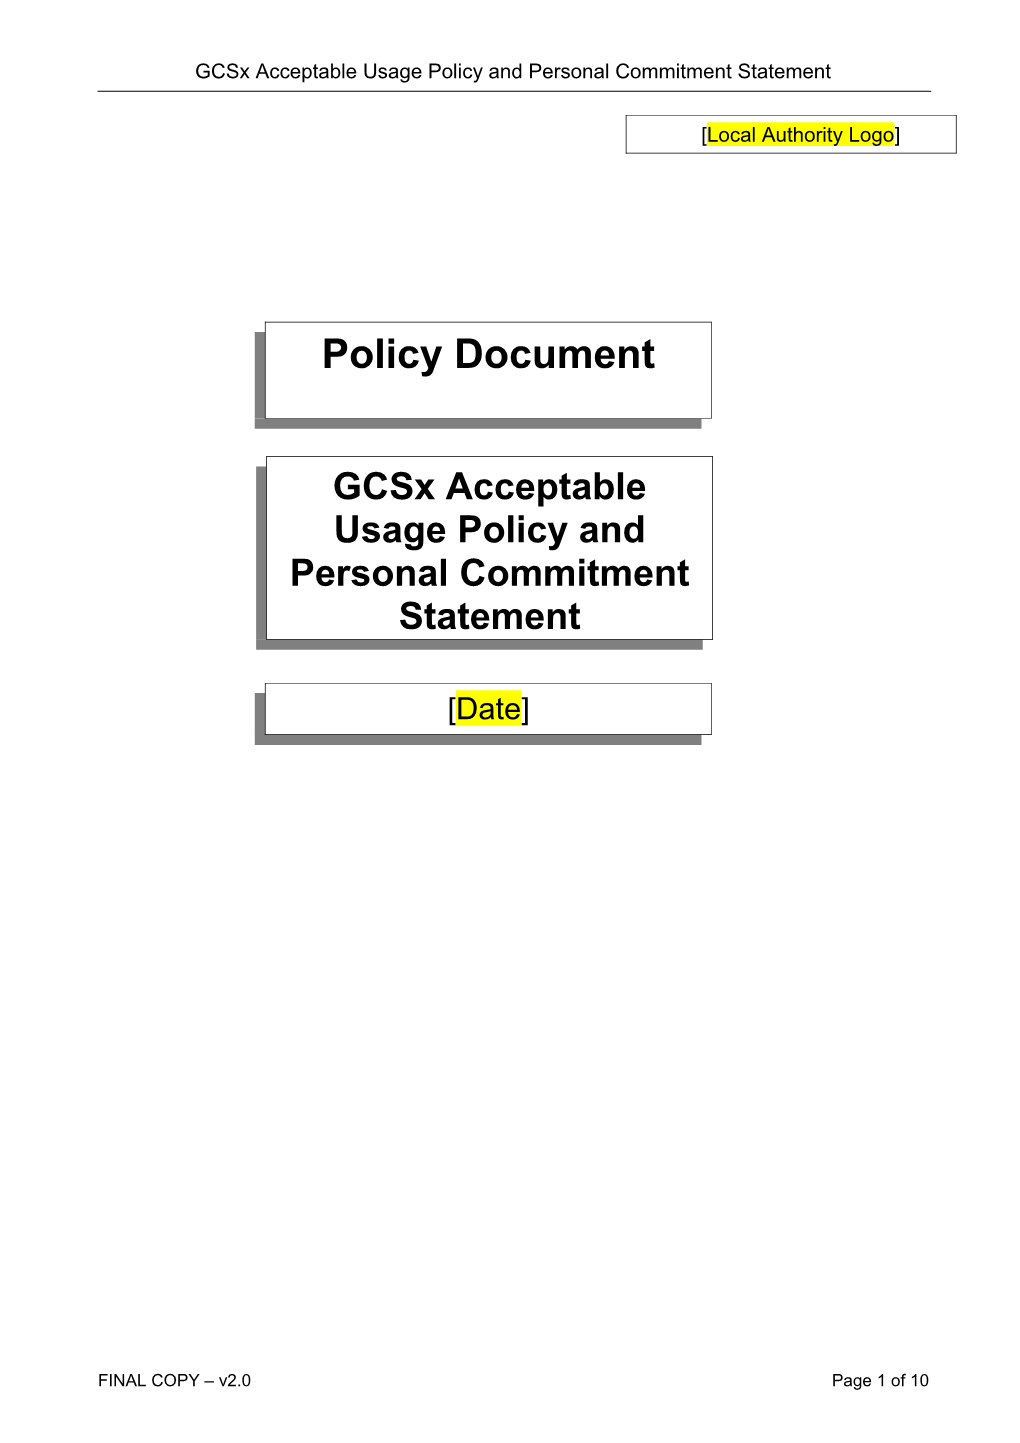 GCSX AUP and Personal Commitment Statement Template